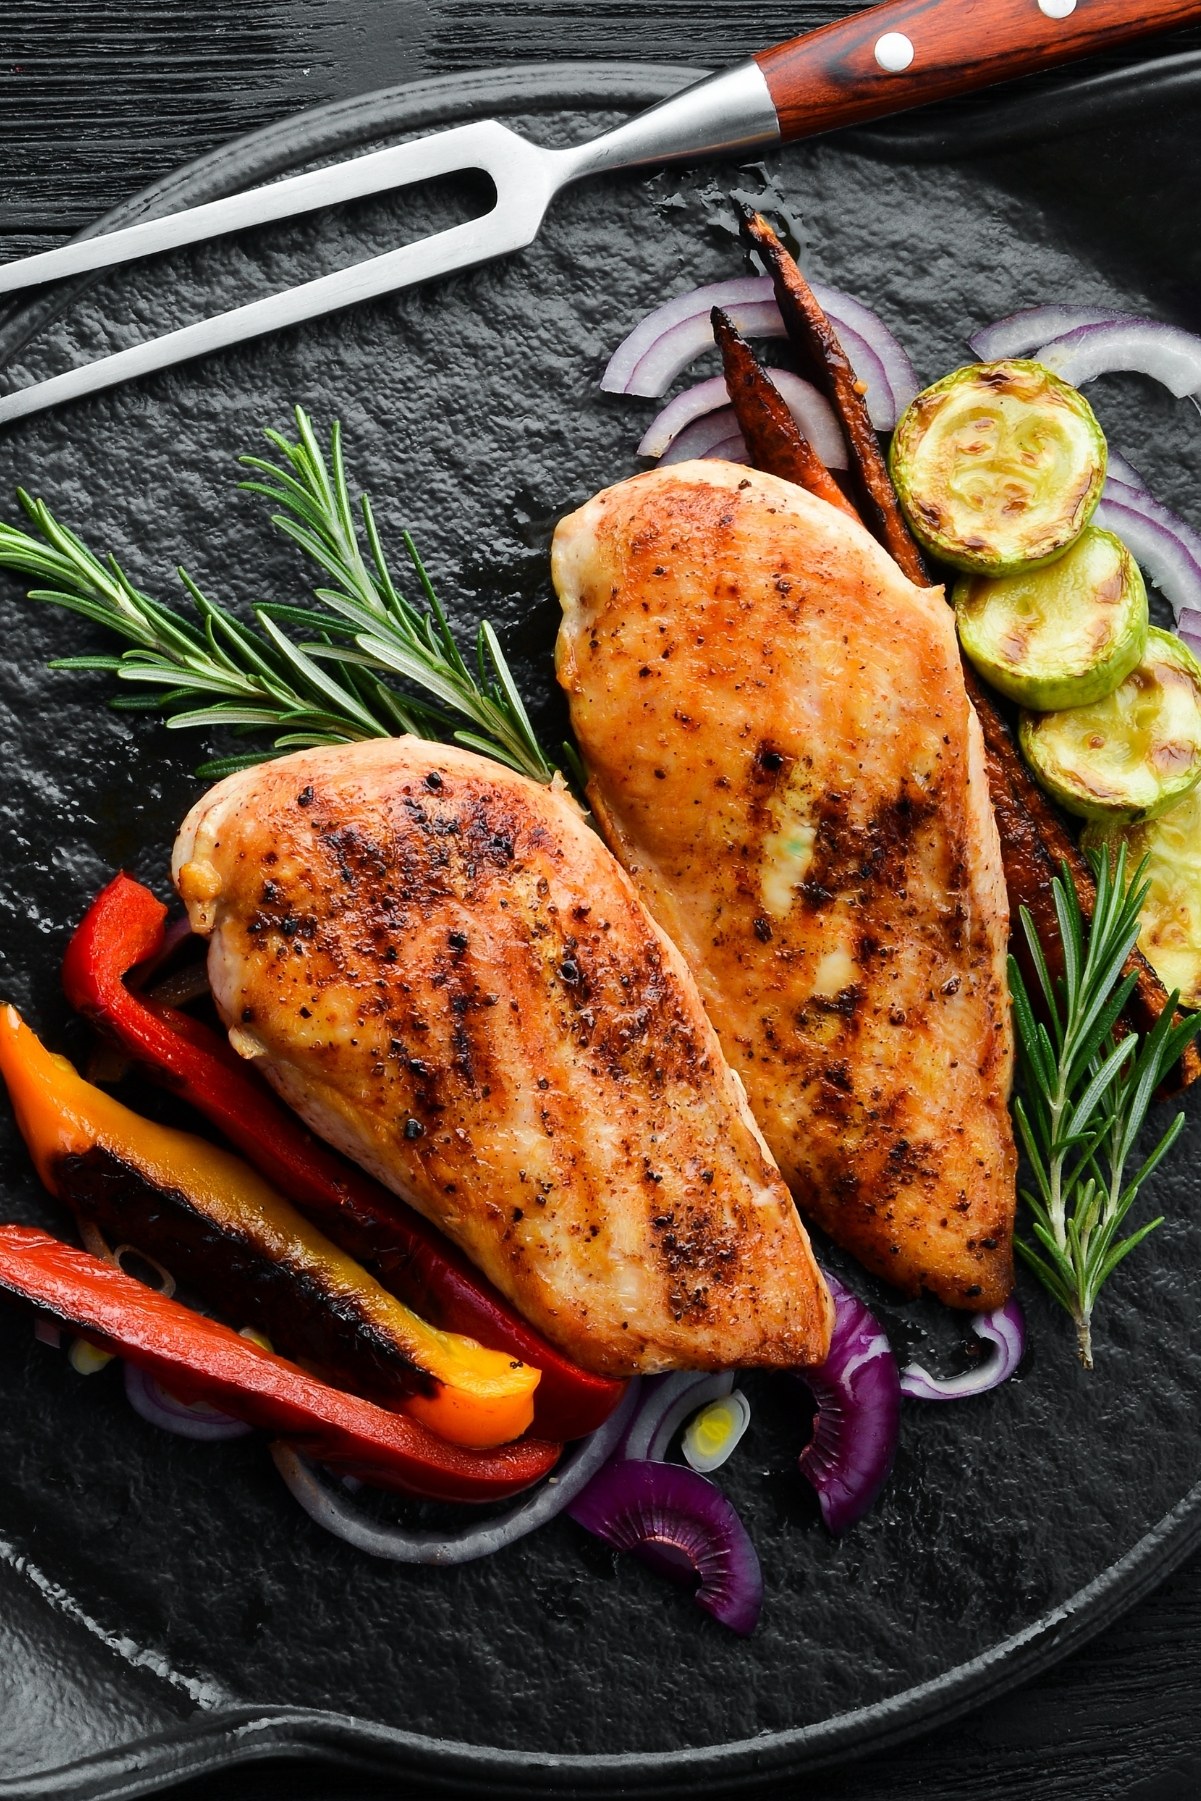 Weight Watchers Grilled Lemon and Herb Chicken Breast on a black surface with grilled vegetables.